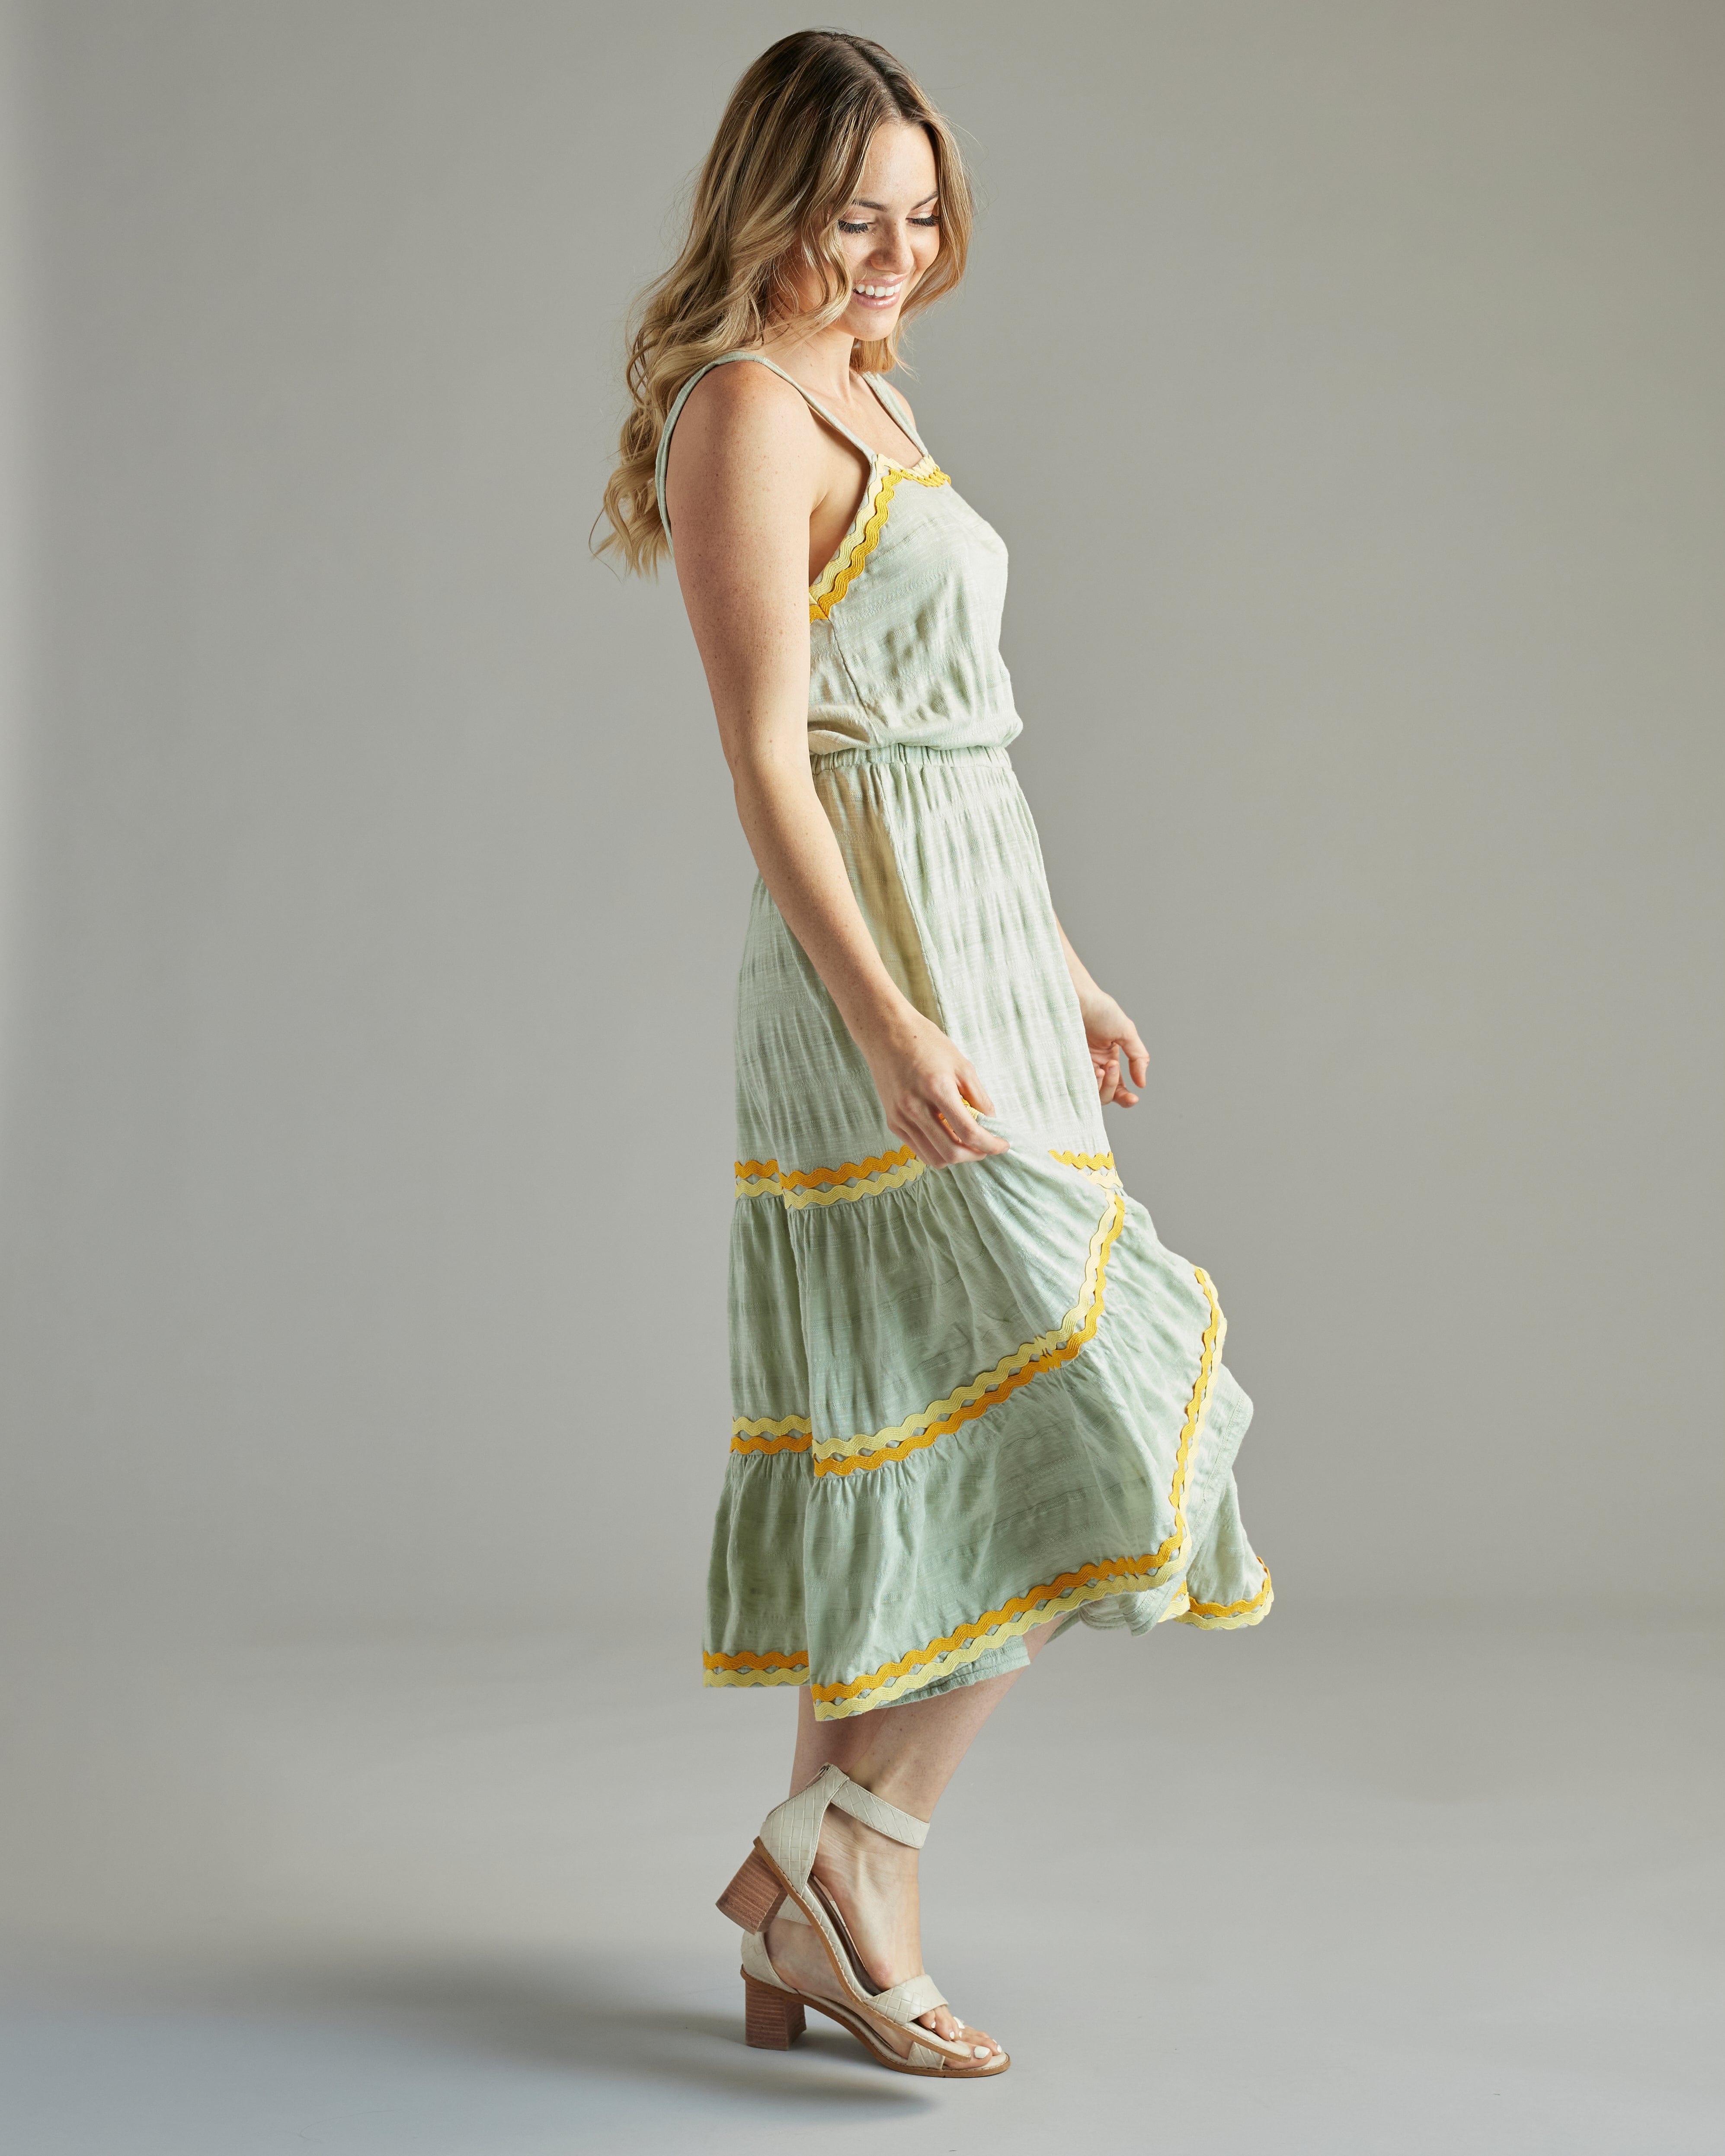 Woman in a sleeveless, midi-length green dress with orange and yellow lace accents